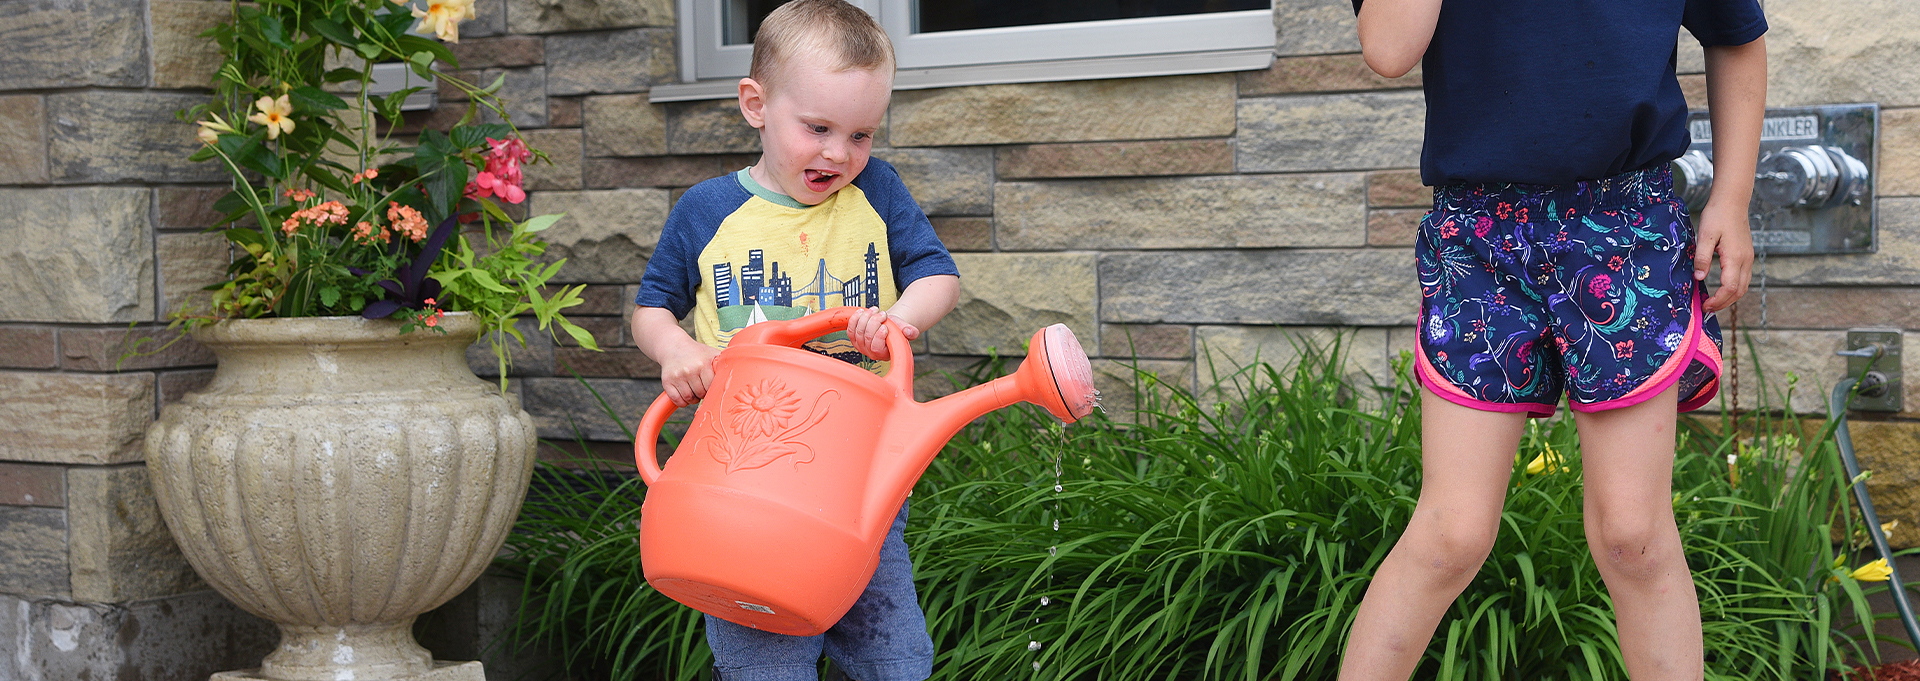 Boy with Watering Can